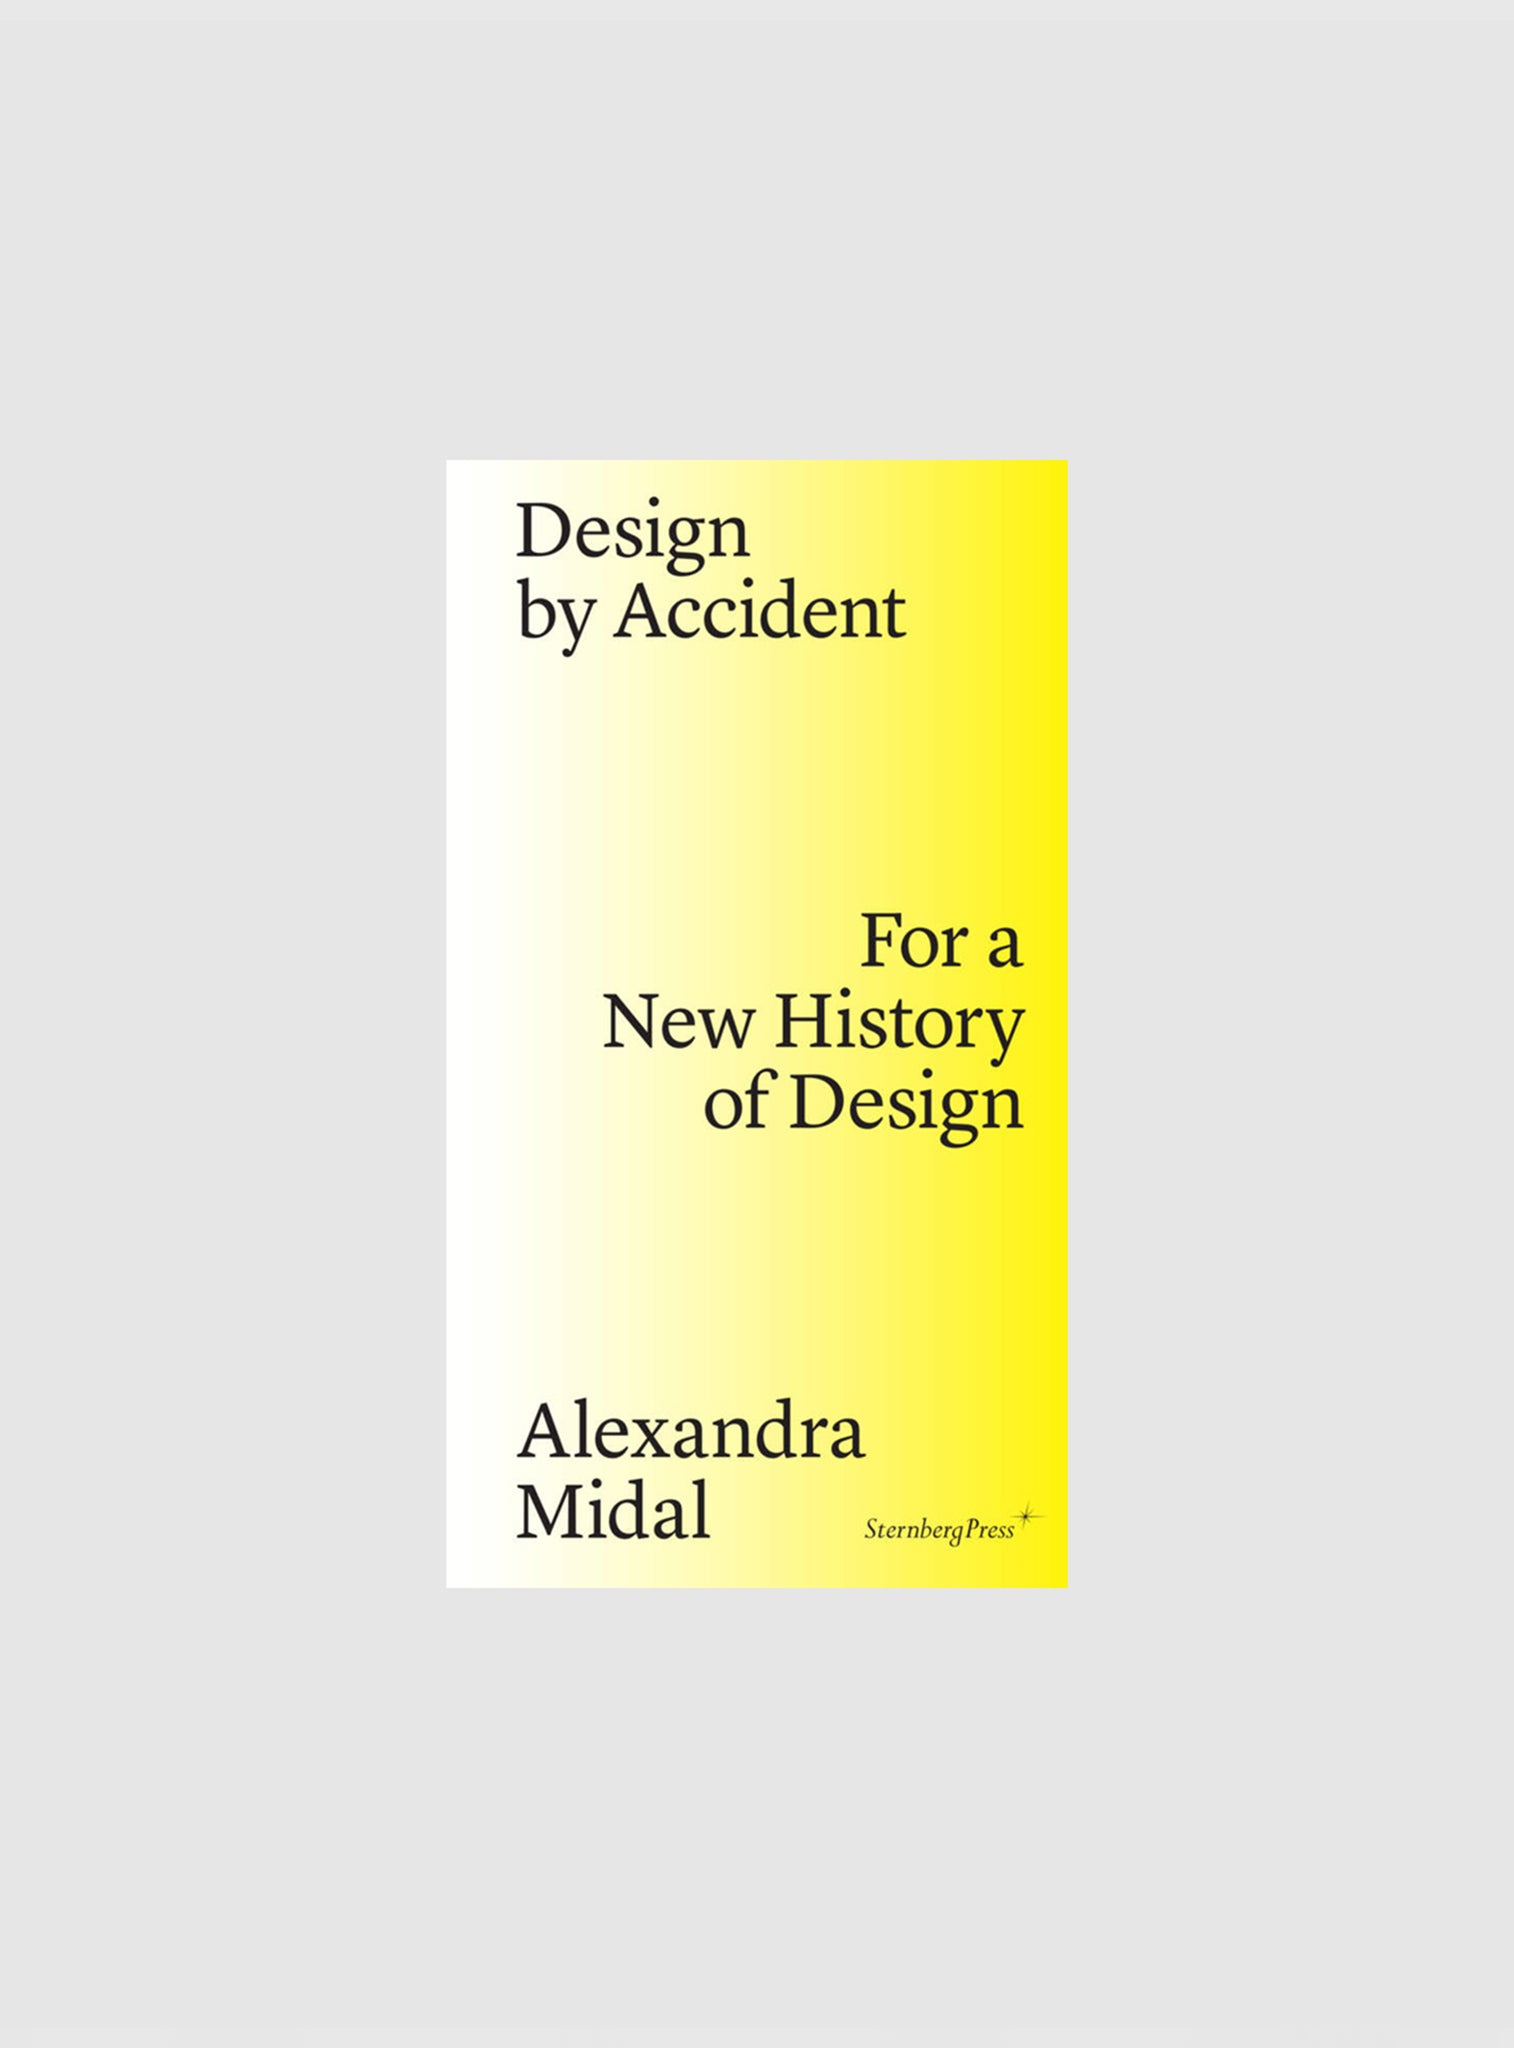 Design by Accident - For a New History of Design (reprint)